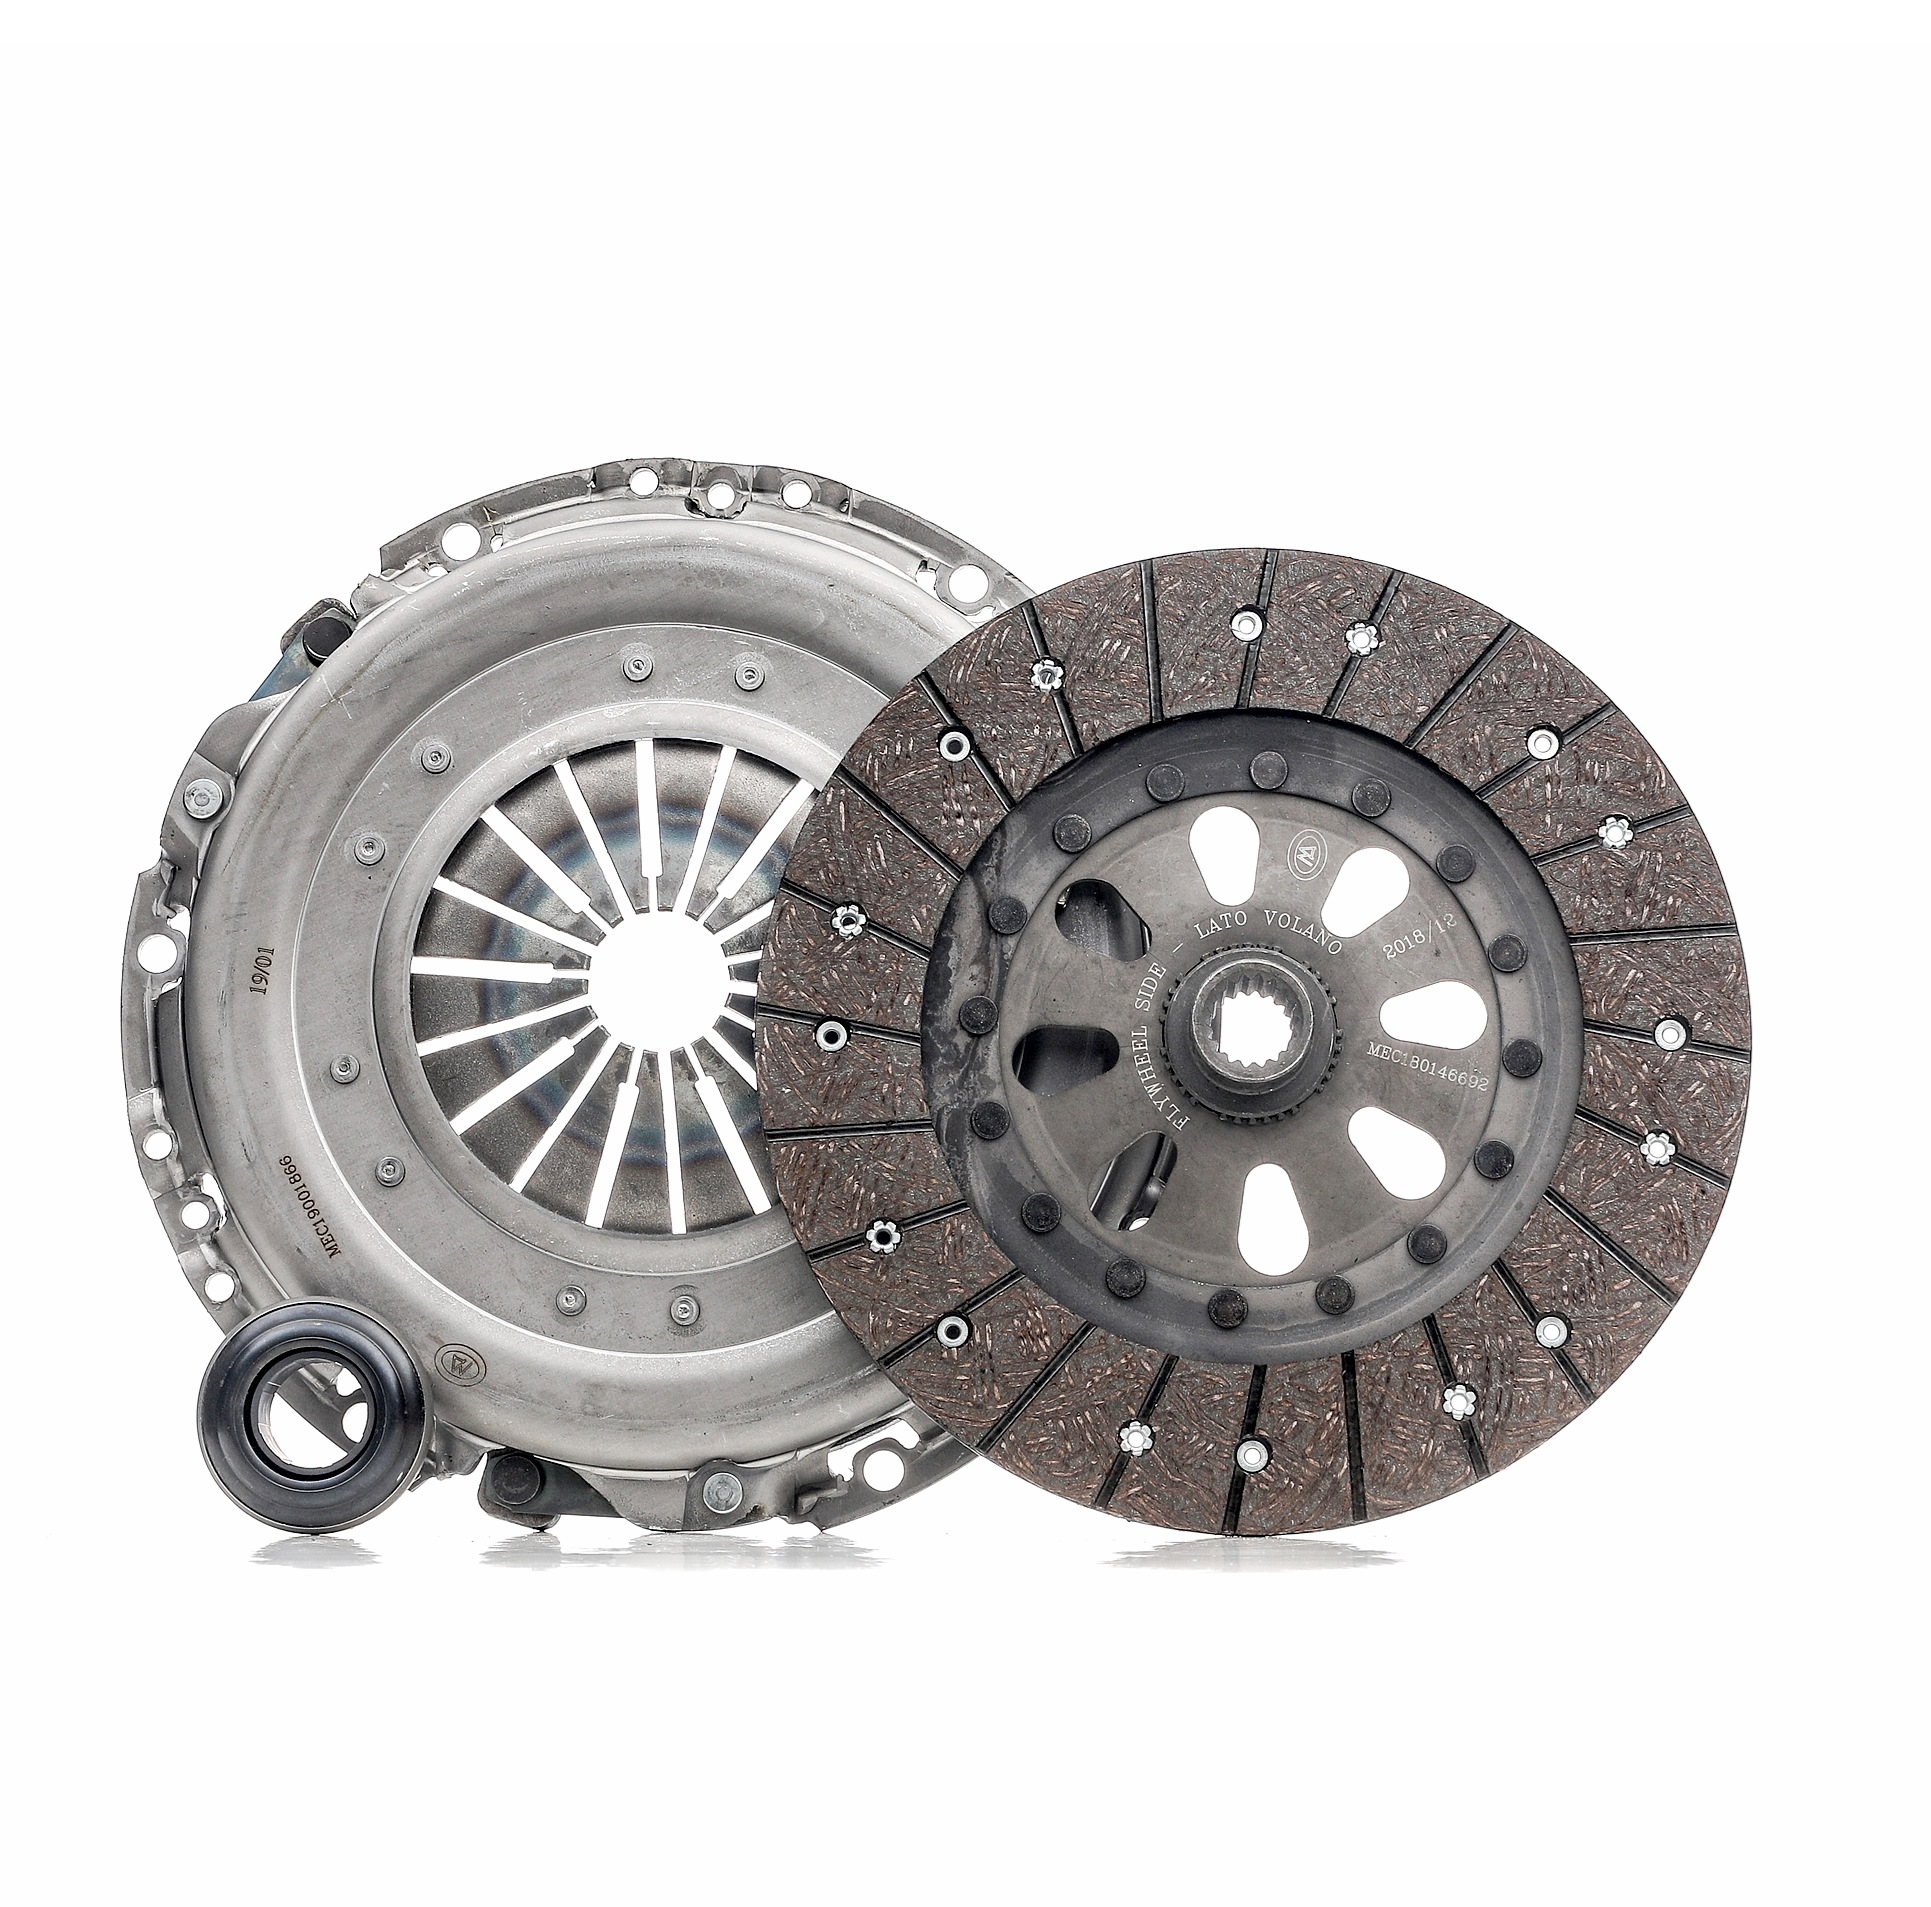 MECARM MK9973 Clutch kit with clutch release bearing, 225mm